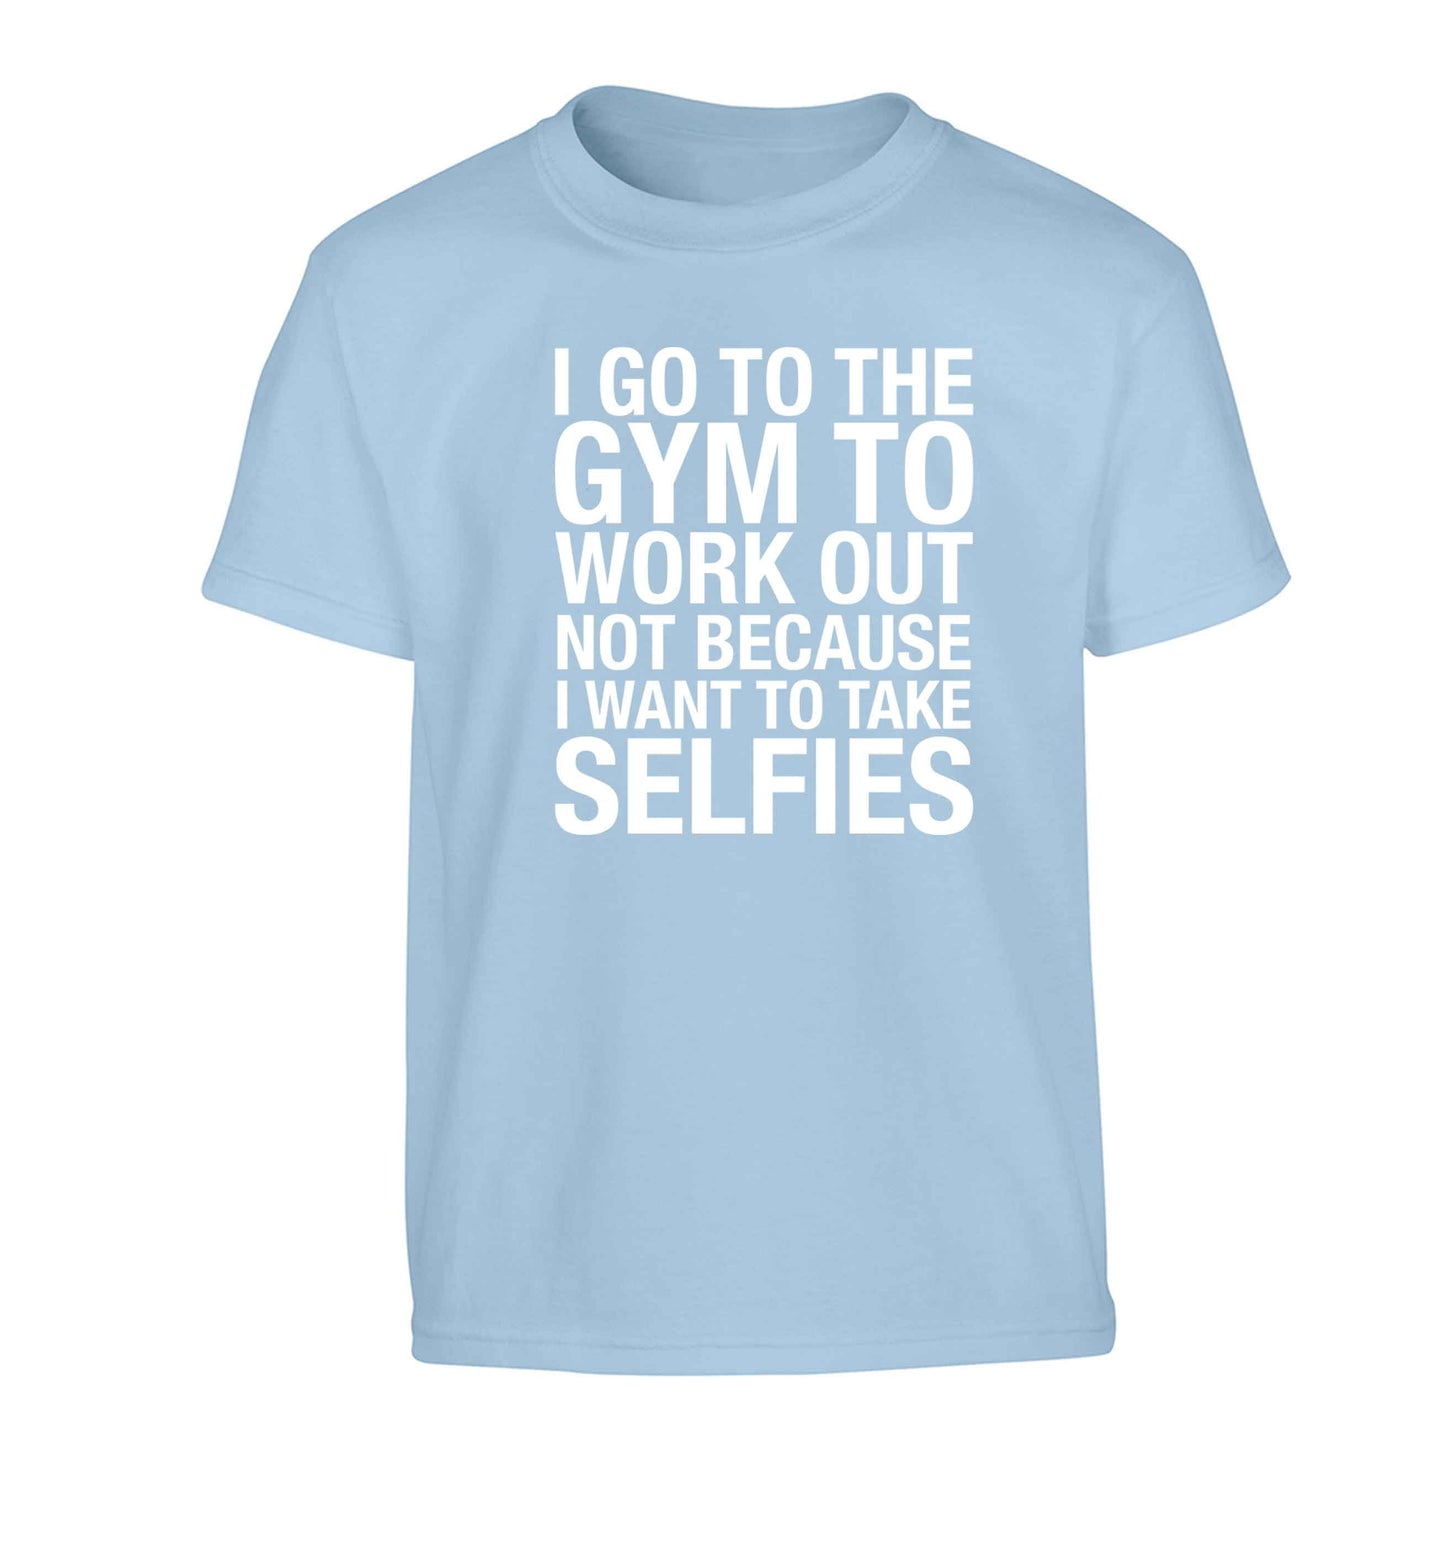 I go to the gym to workout not to take selfies Children's light blue Tshirt 12-13 Years